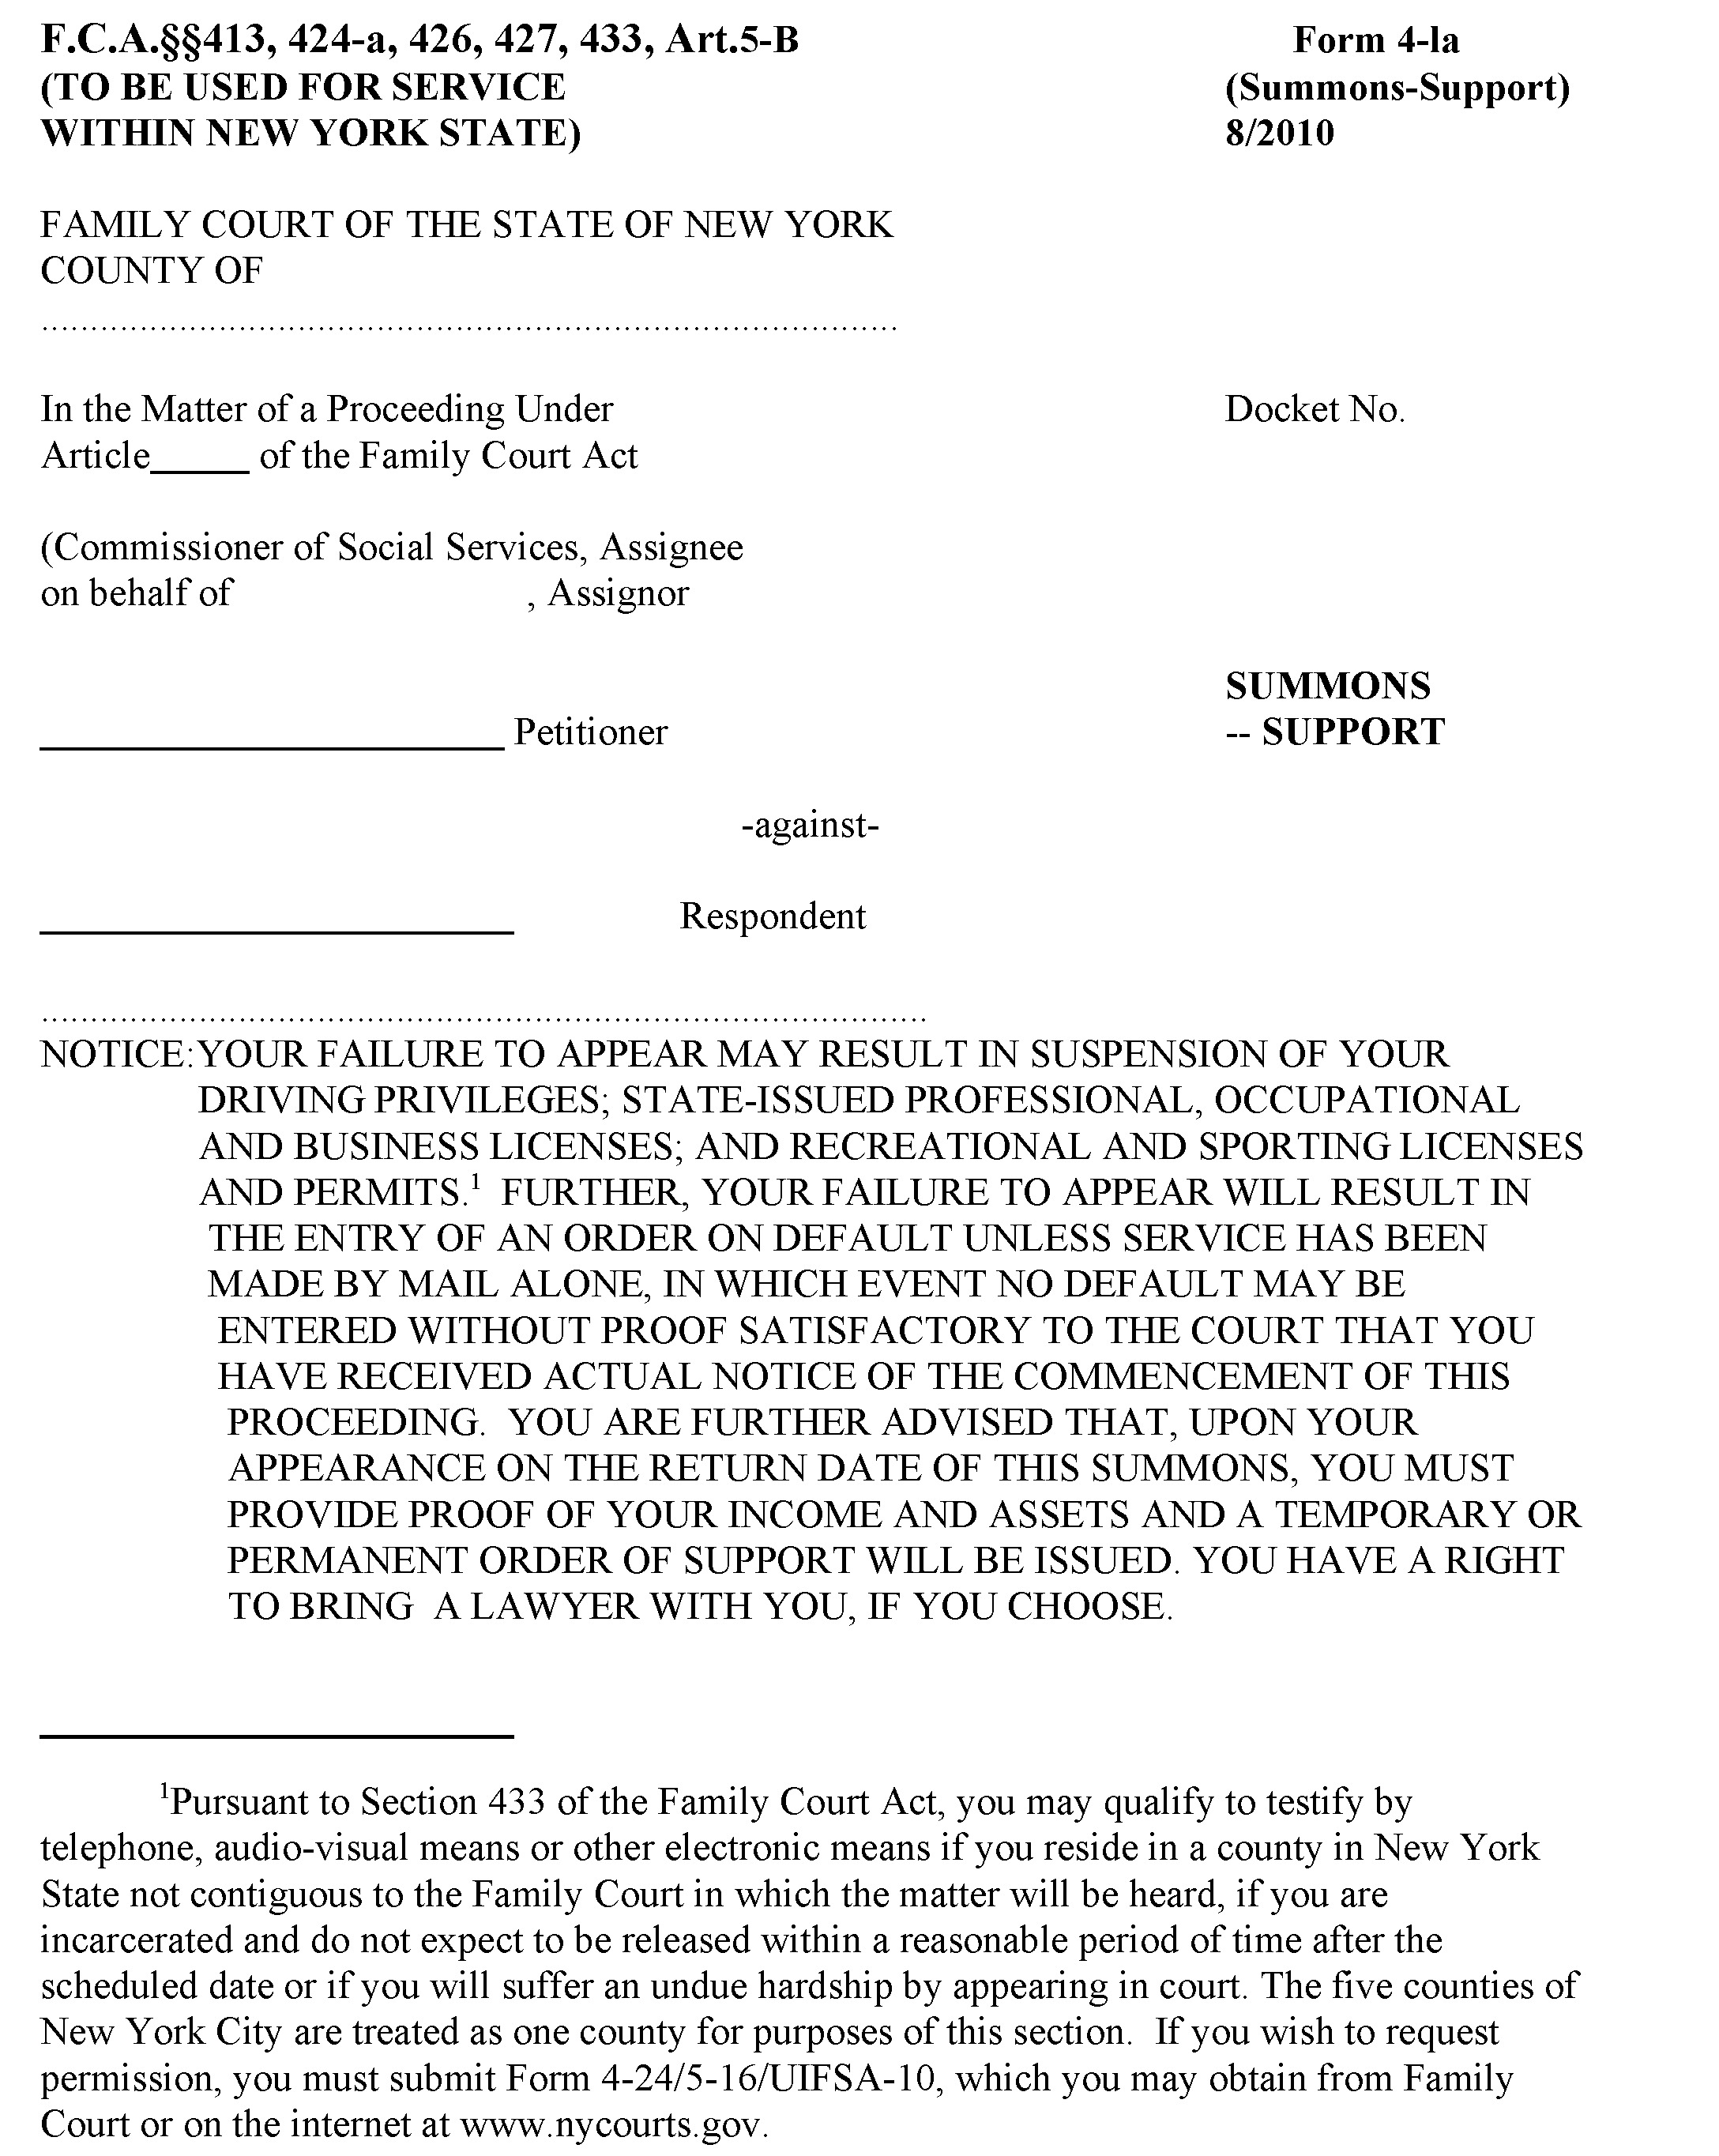 View Document - New York Codes, Rules and Regulations